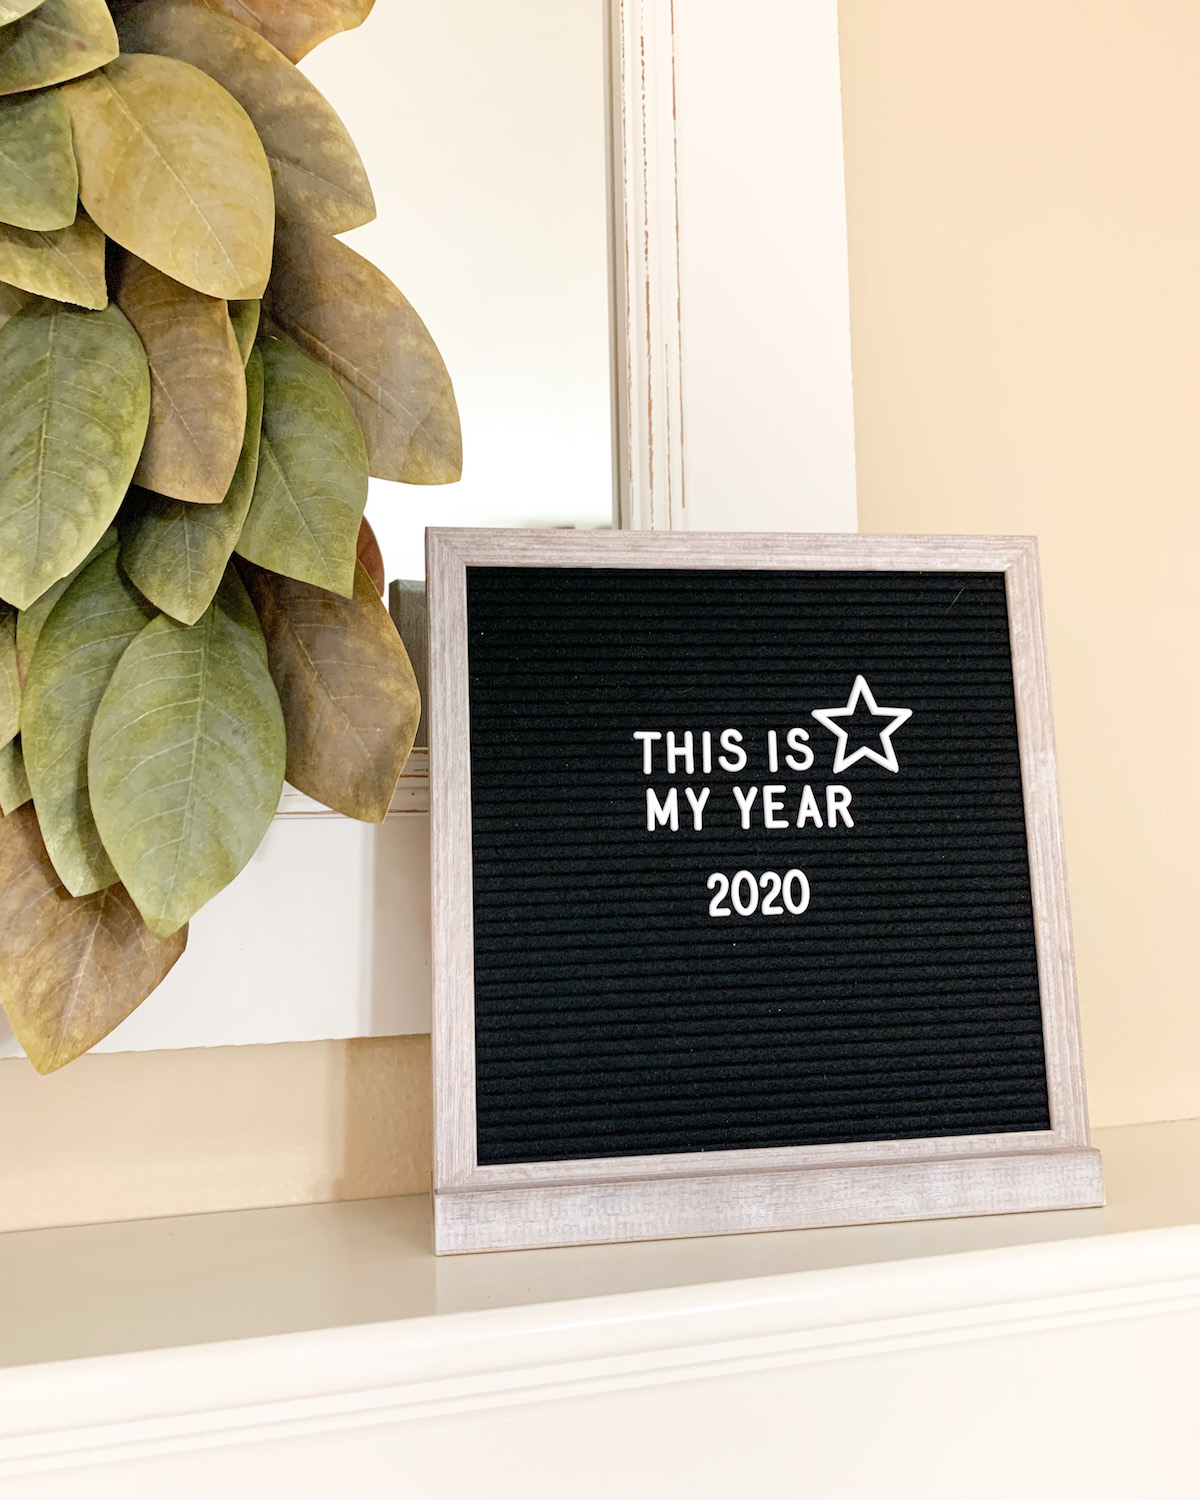 5 Letter Board Quotes for 2020